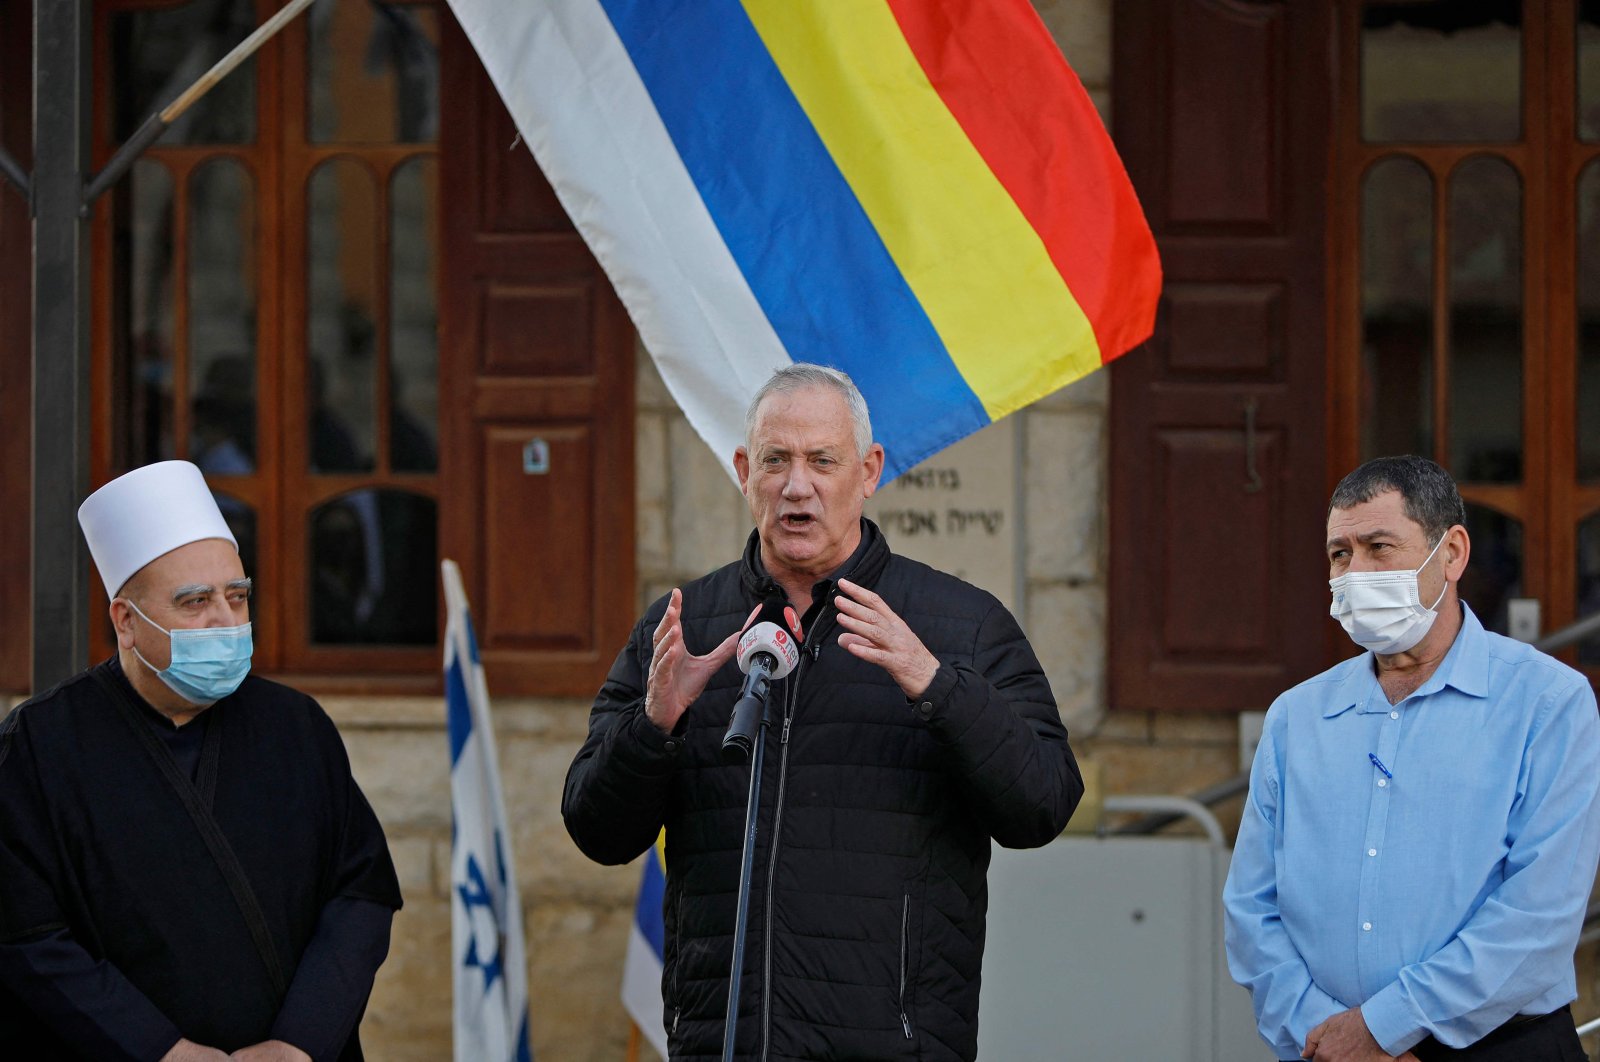 Defence Minister Benny Gantz (C), the leader of the Kahol Lavan (Blue and White) party, speaks during a visit to the Druze village of Julis, northern Israel, Feb. 23, 2021. 